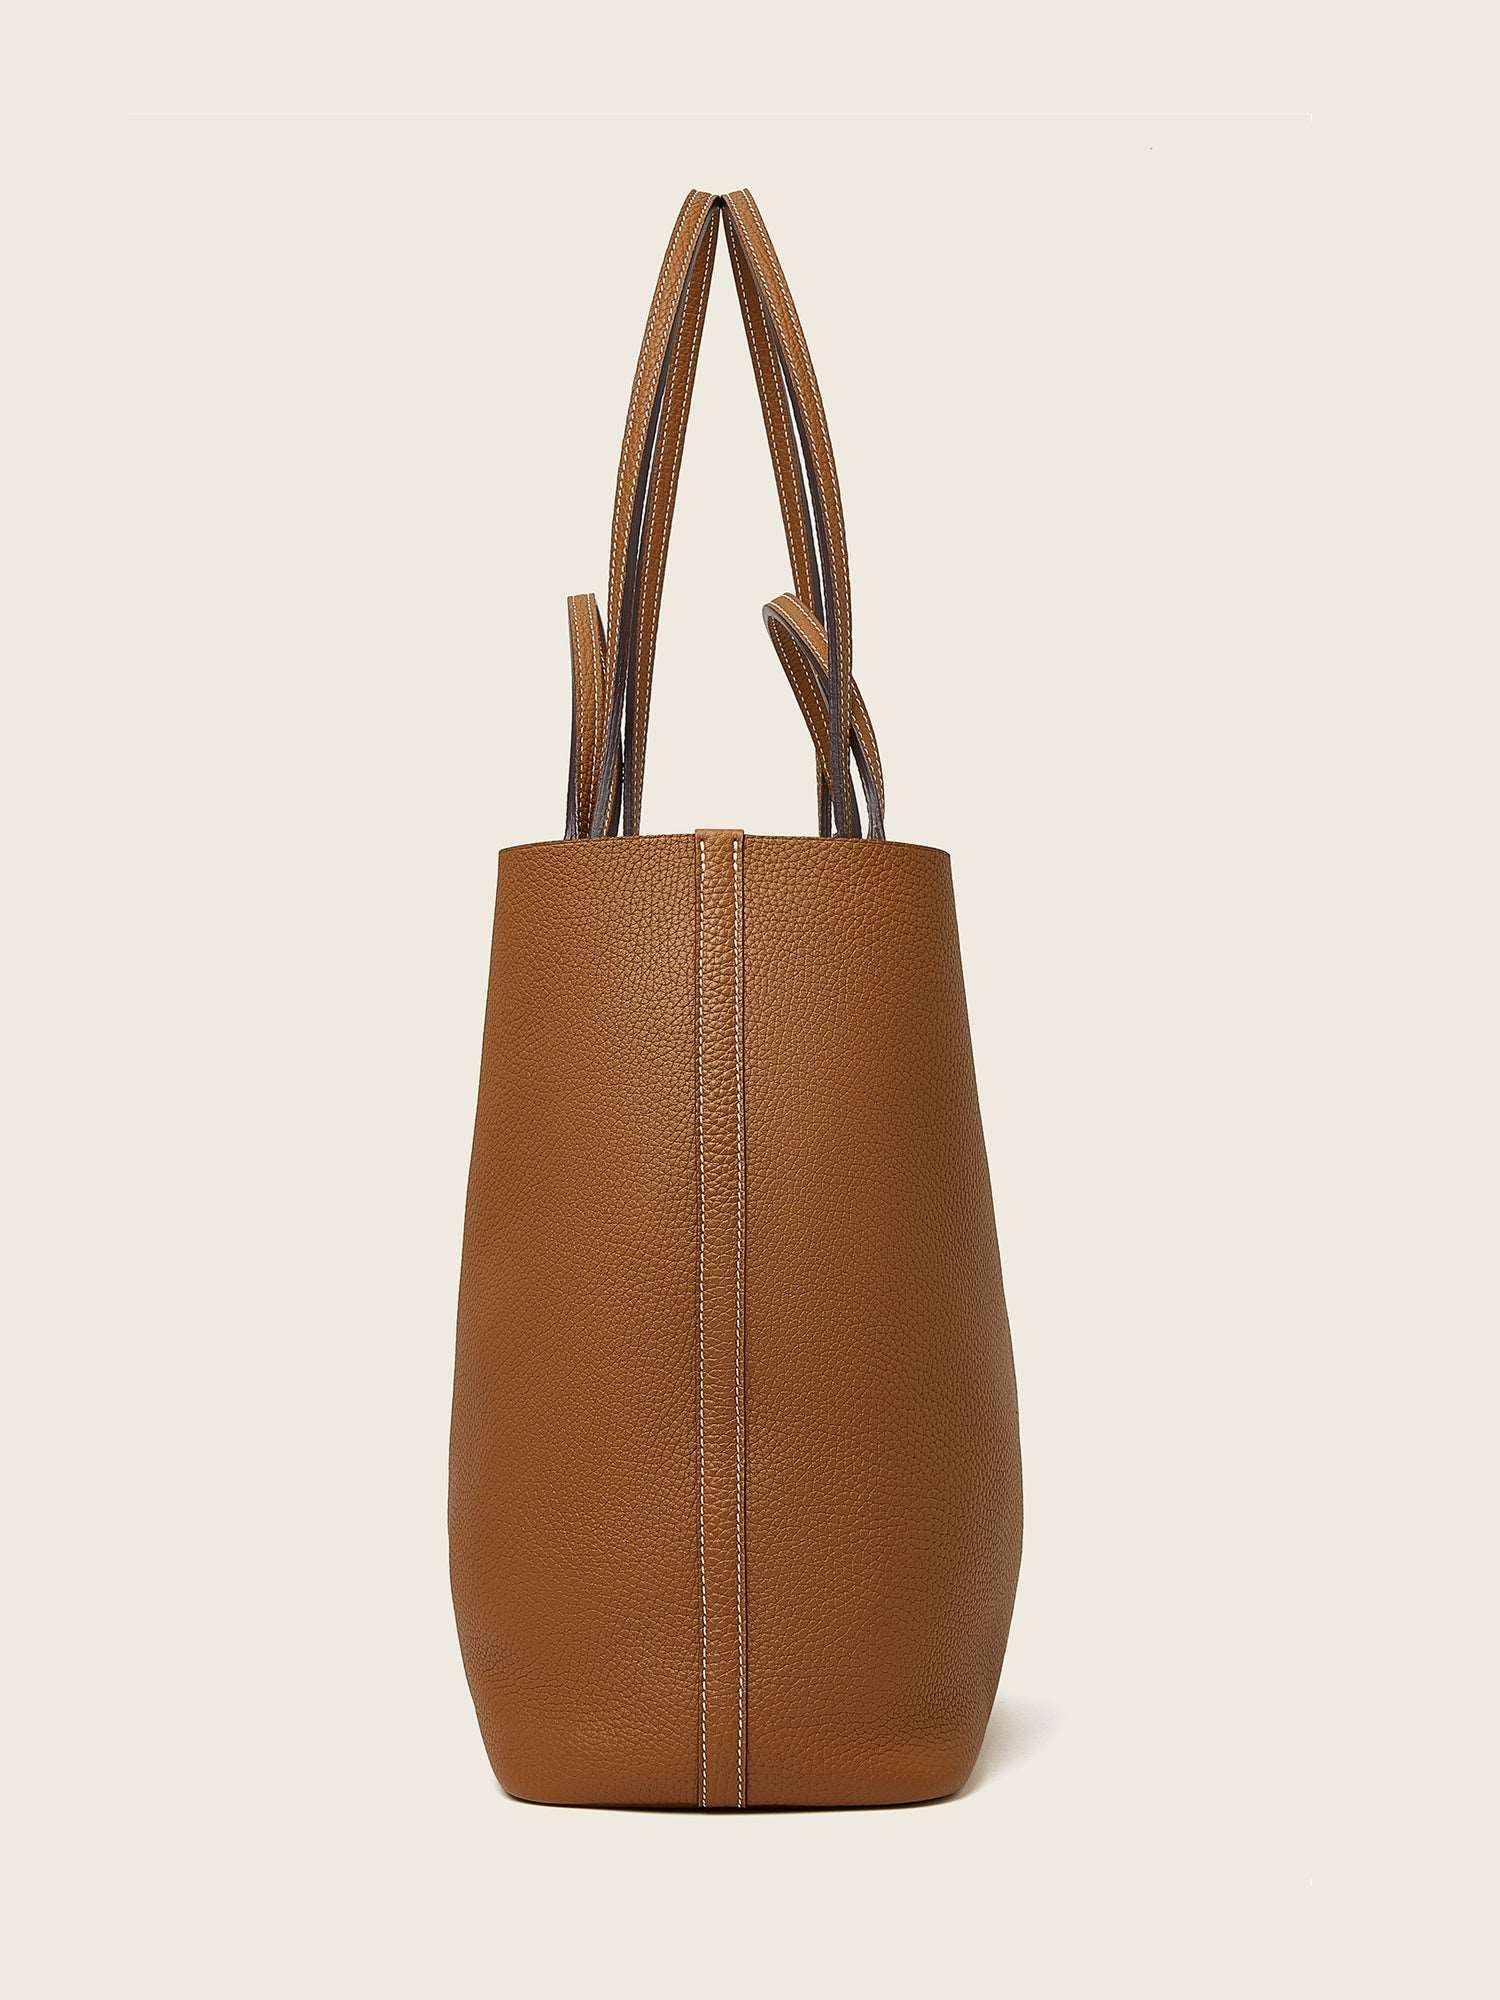 Hpai Large Yesod Tote Bag in Leather - Acorn